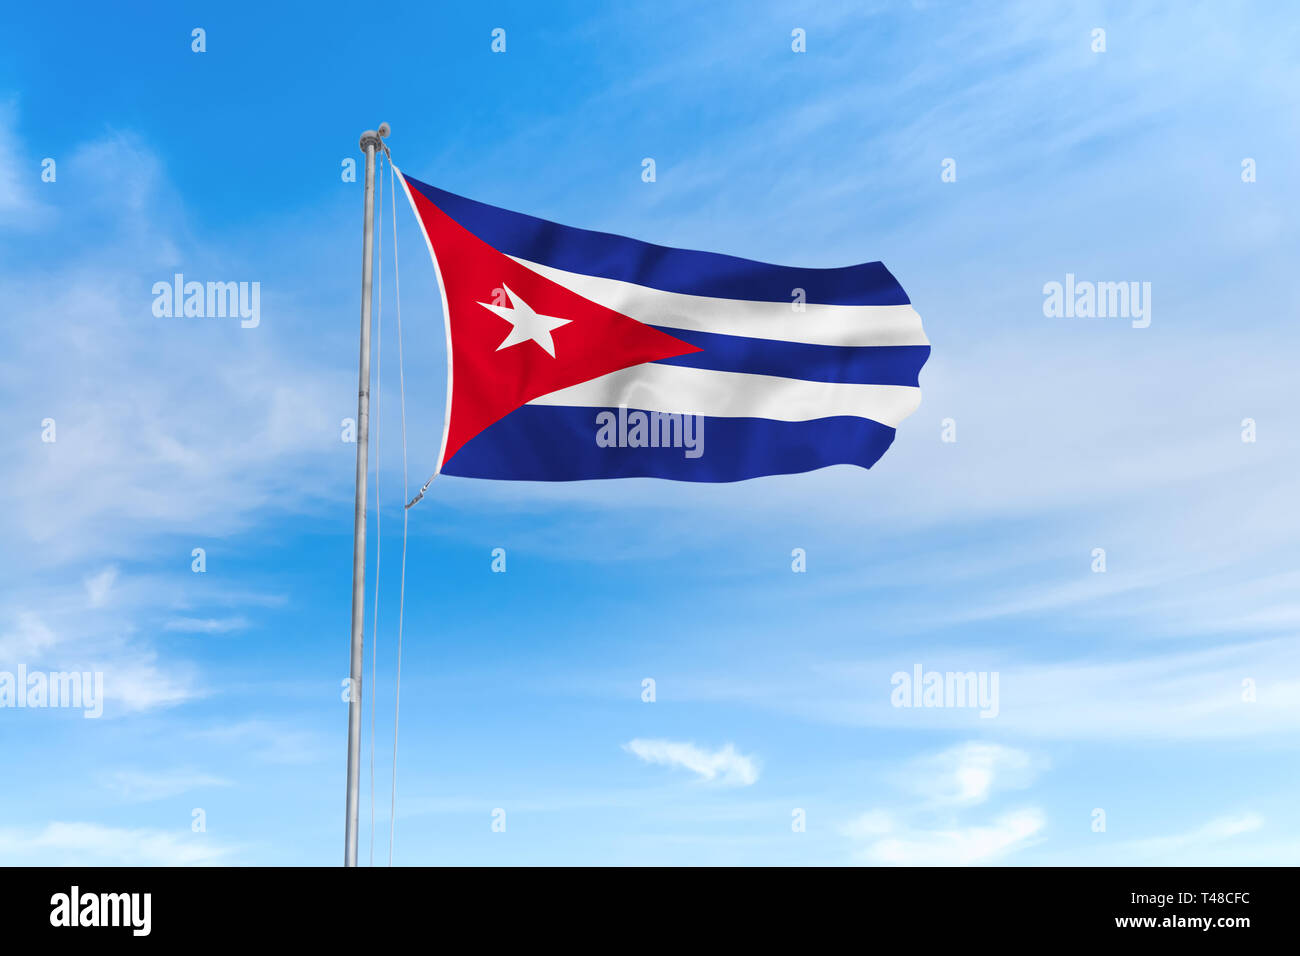 Cuba flag blowing in the wind over nice blue sky background Stock Photo